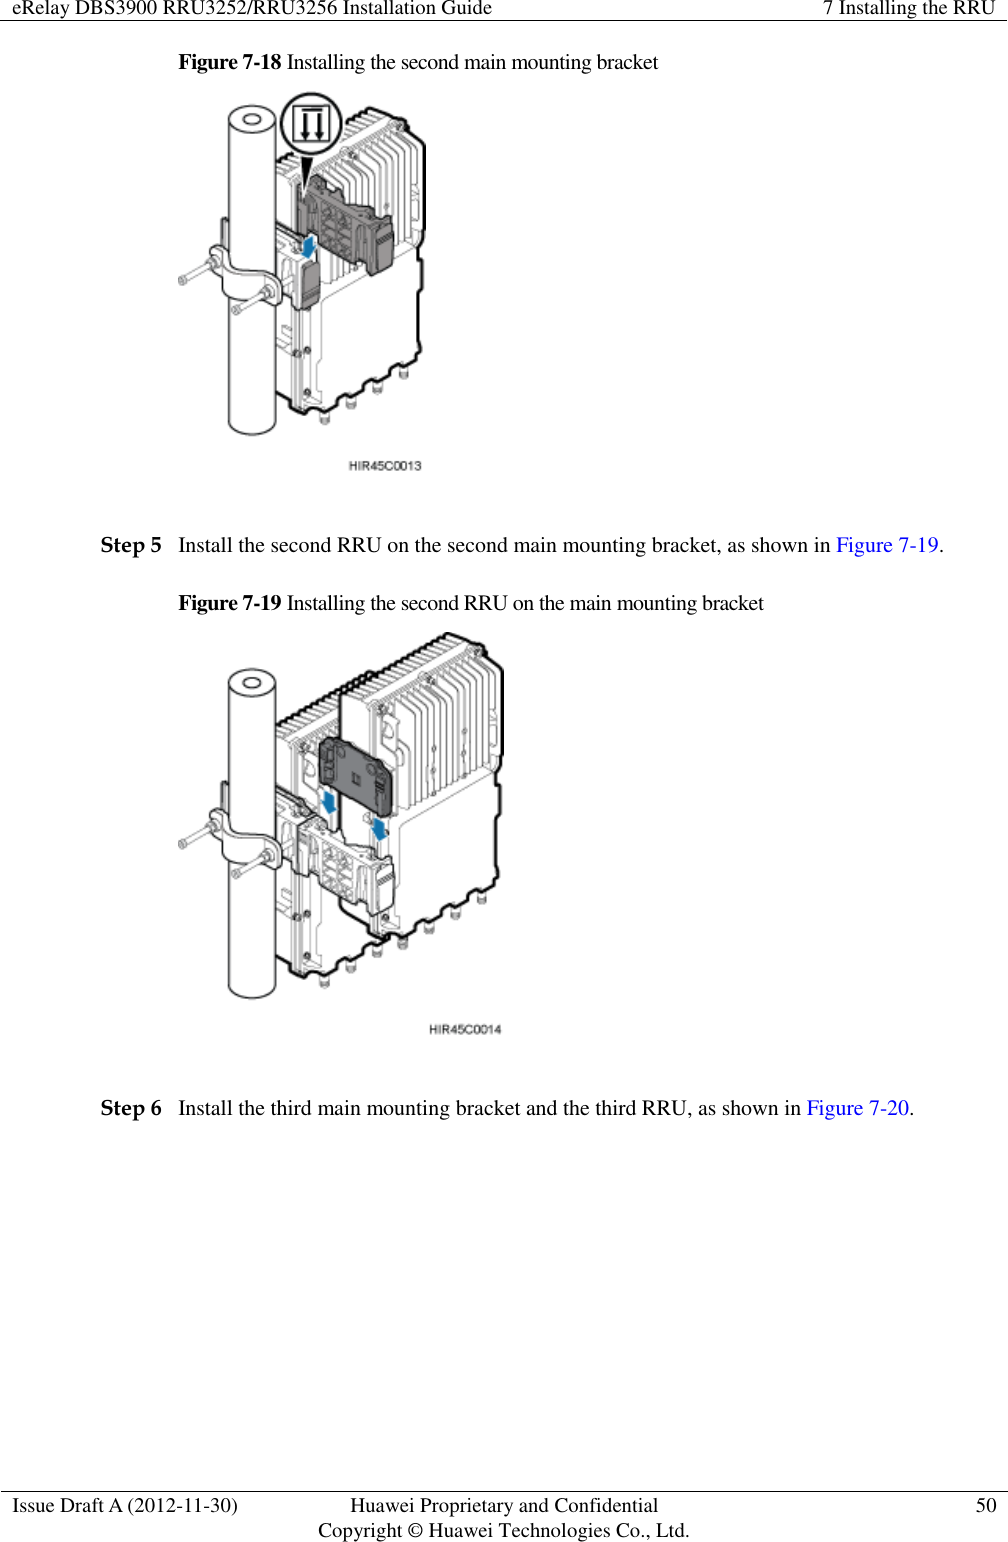 eRelay DBS3900 RRU3252/RRU3256 Installation Guide 7 Installing the RRU  Issue Draft A (2012-11-30) Huawei Proprietary and Confidential                                     Copyright © Huawei Technologies Co., Ltd. 50  Figure 7-18 Installing the second main mounting bracket   Step 5 Install the second RRU on the second main mounting bracket, as shown in Figure 7-19. Figure 7-19 Installing the second RRU on the main mounting bracket   Step 6 Install the third main mounting bracket and the third RRU, as shown in Figure 7-20. 